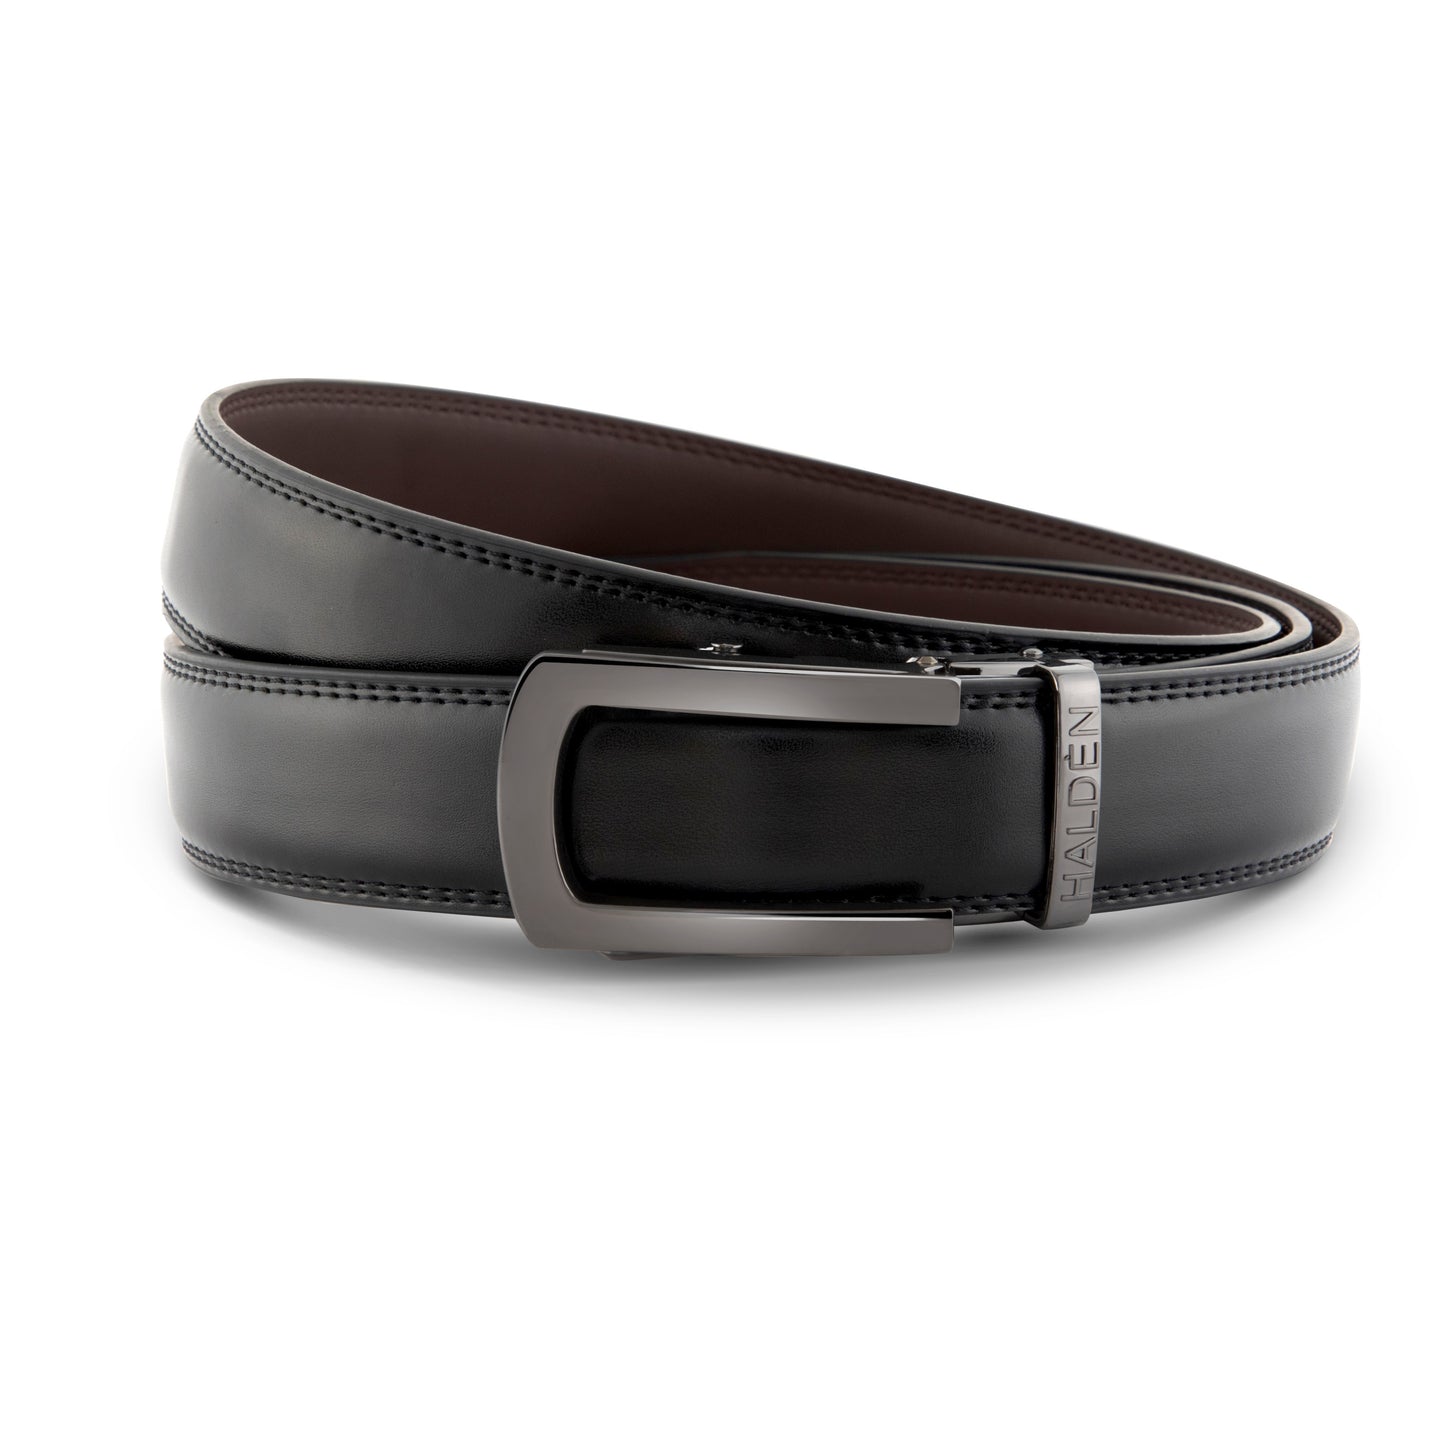 Burley black with classic buckle